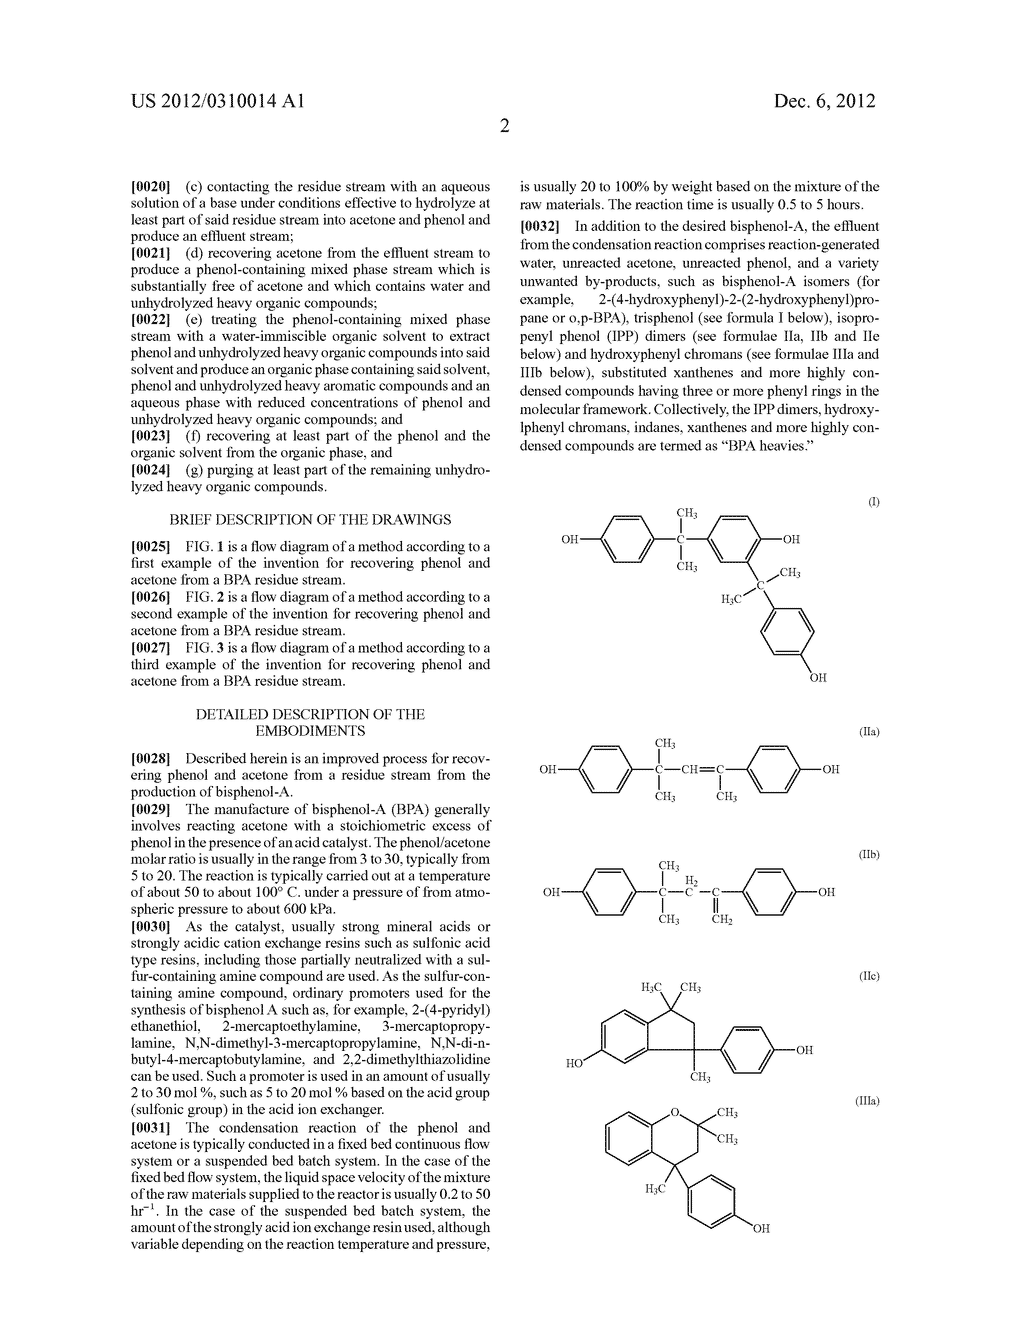 TREATMENT OF BISPHENOL-A RESIDUE STREAMS - diagram, schematic, and image 06